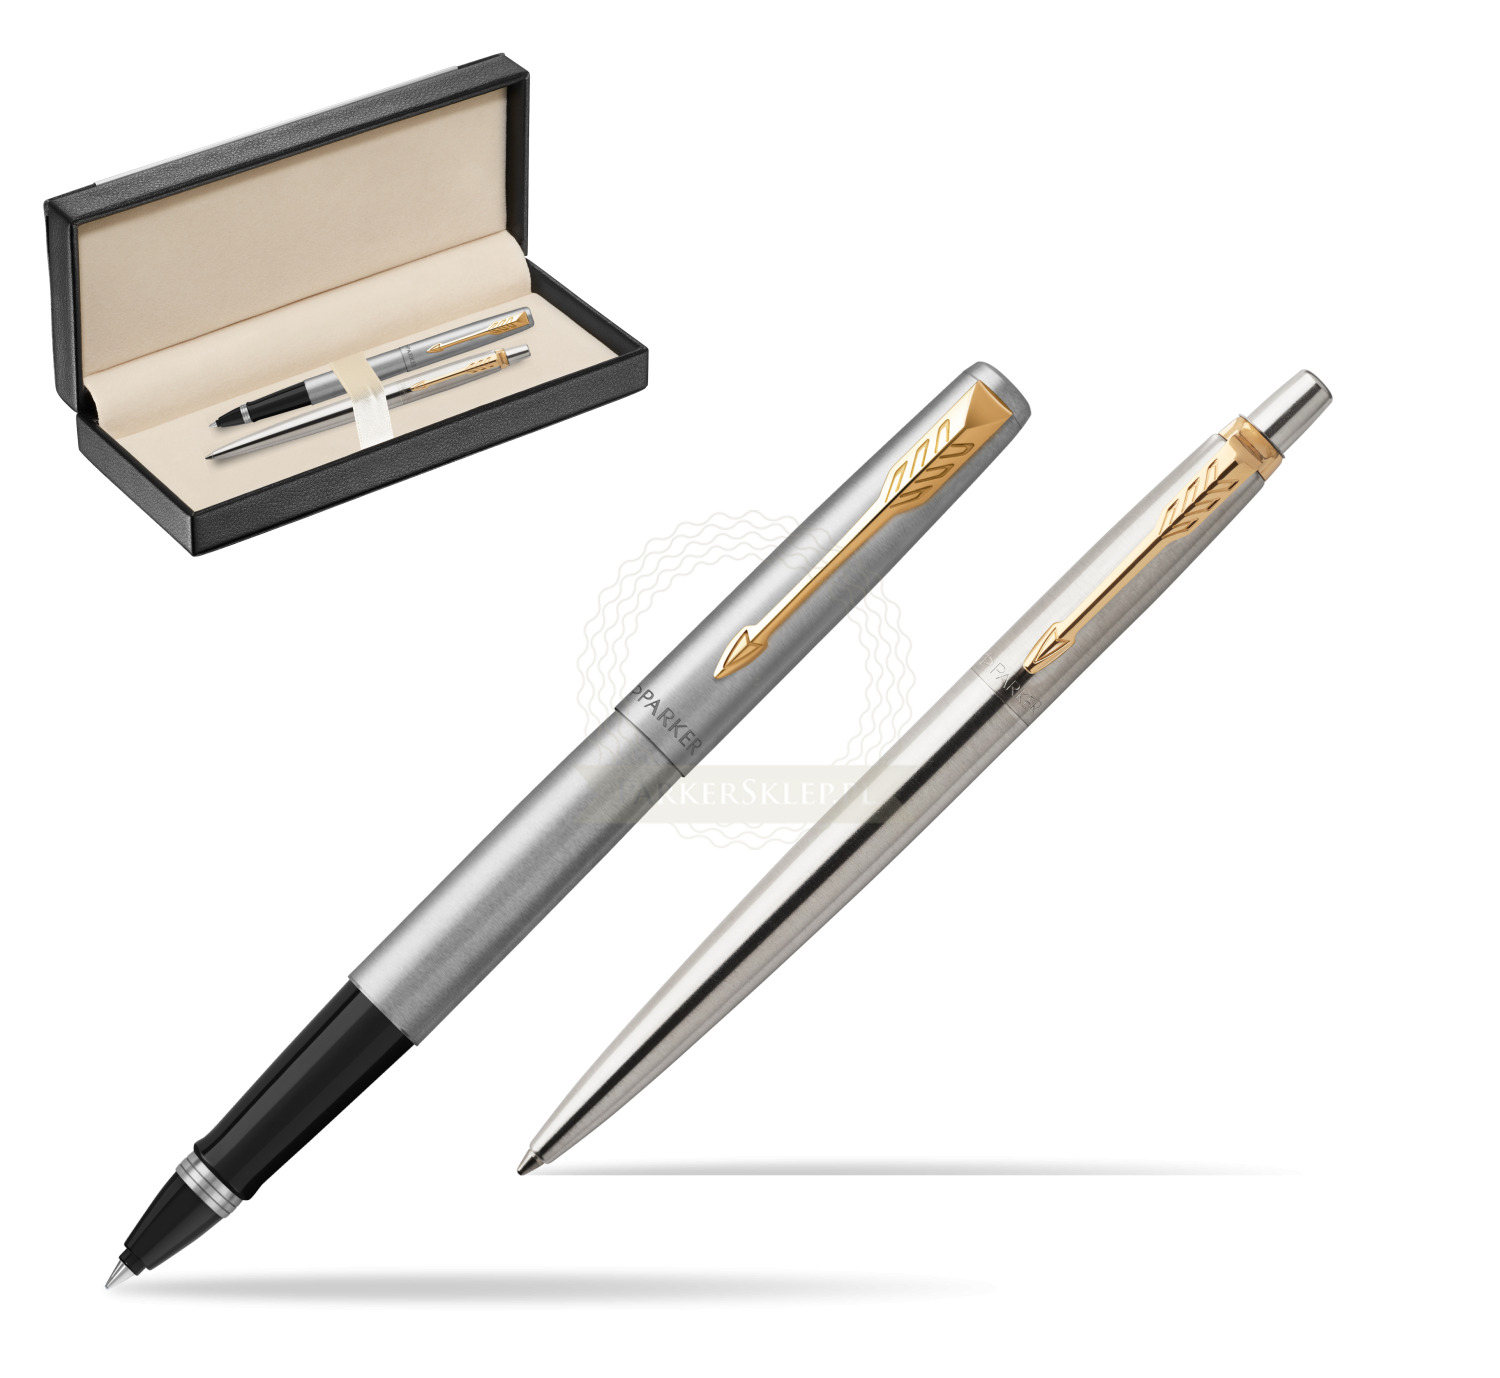 Parker Classic Matte Black ball pen CT Chrome Trim with Gift Box Best Price